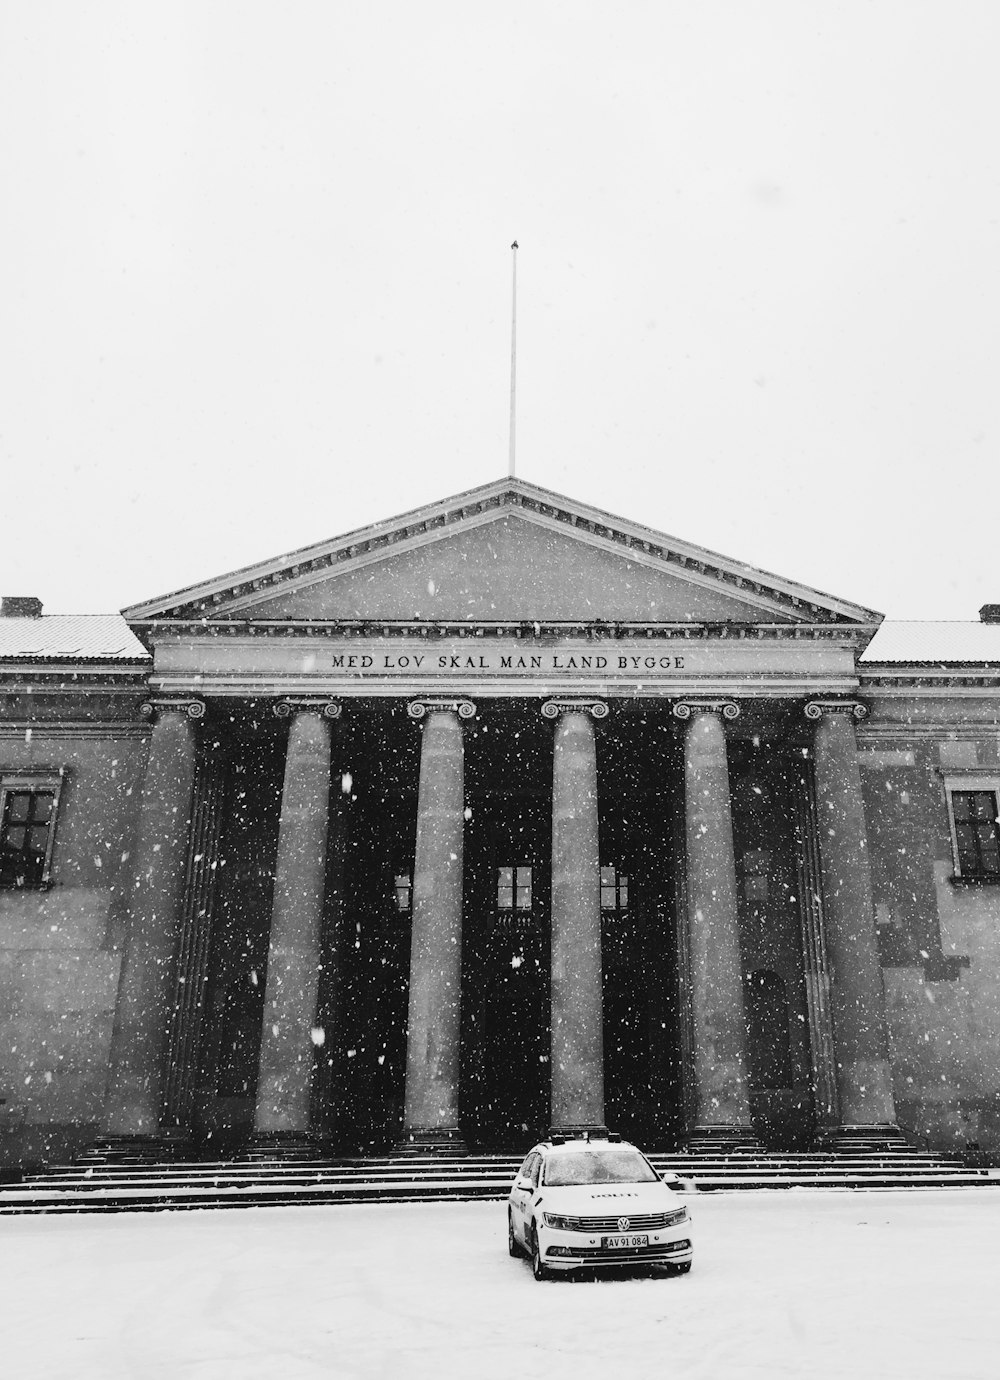 Medlov Sxal man Land Bygge building with snow